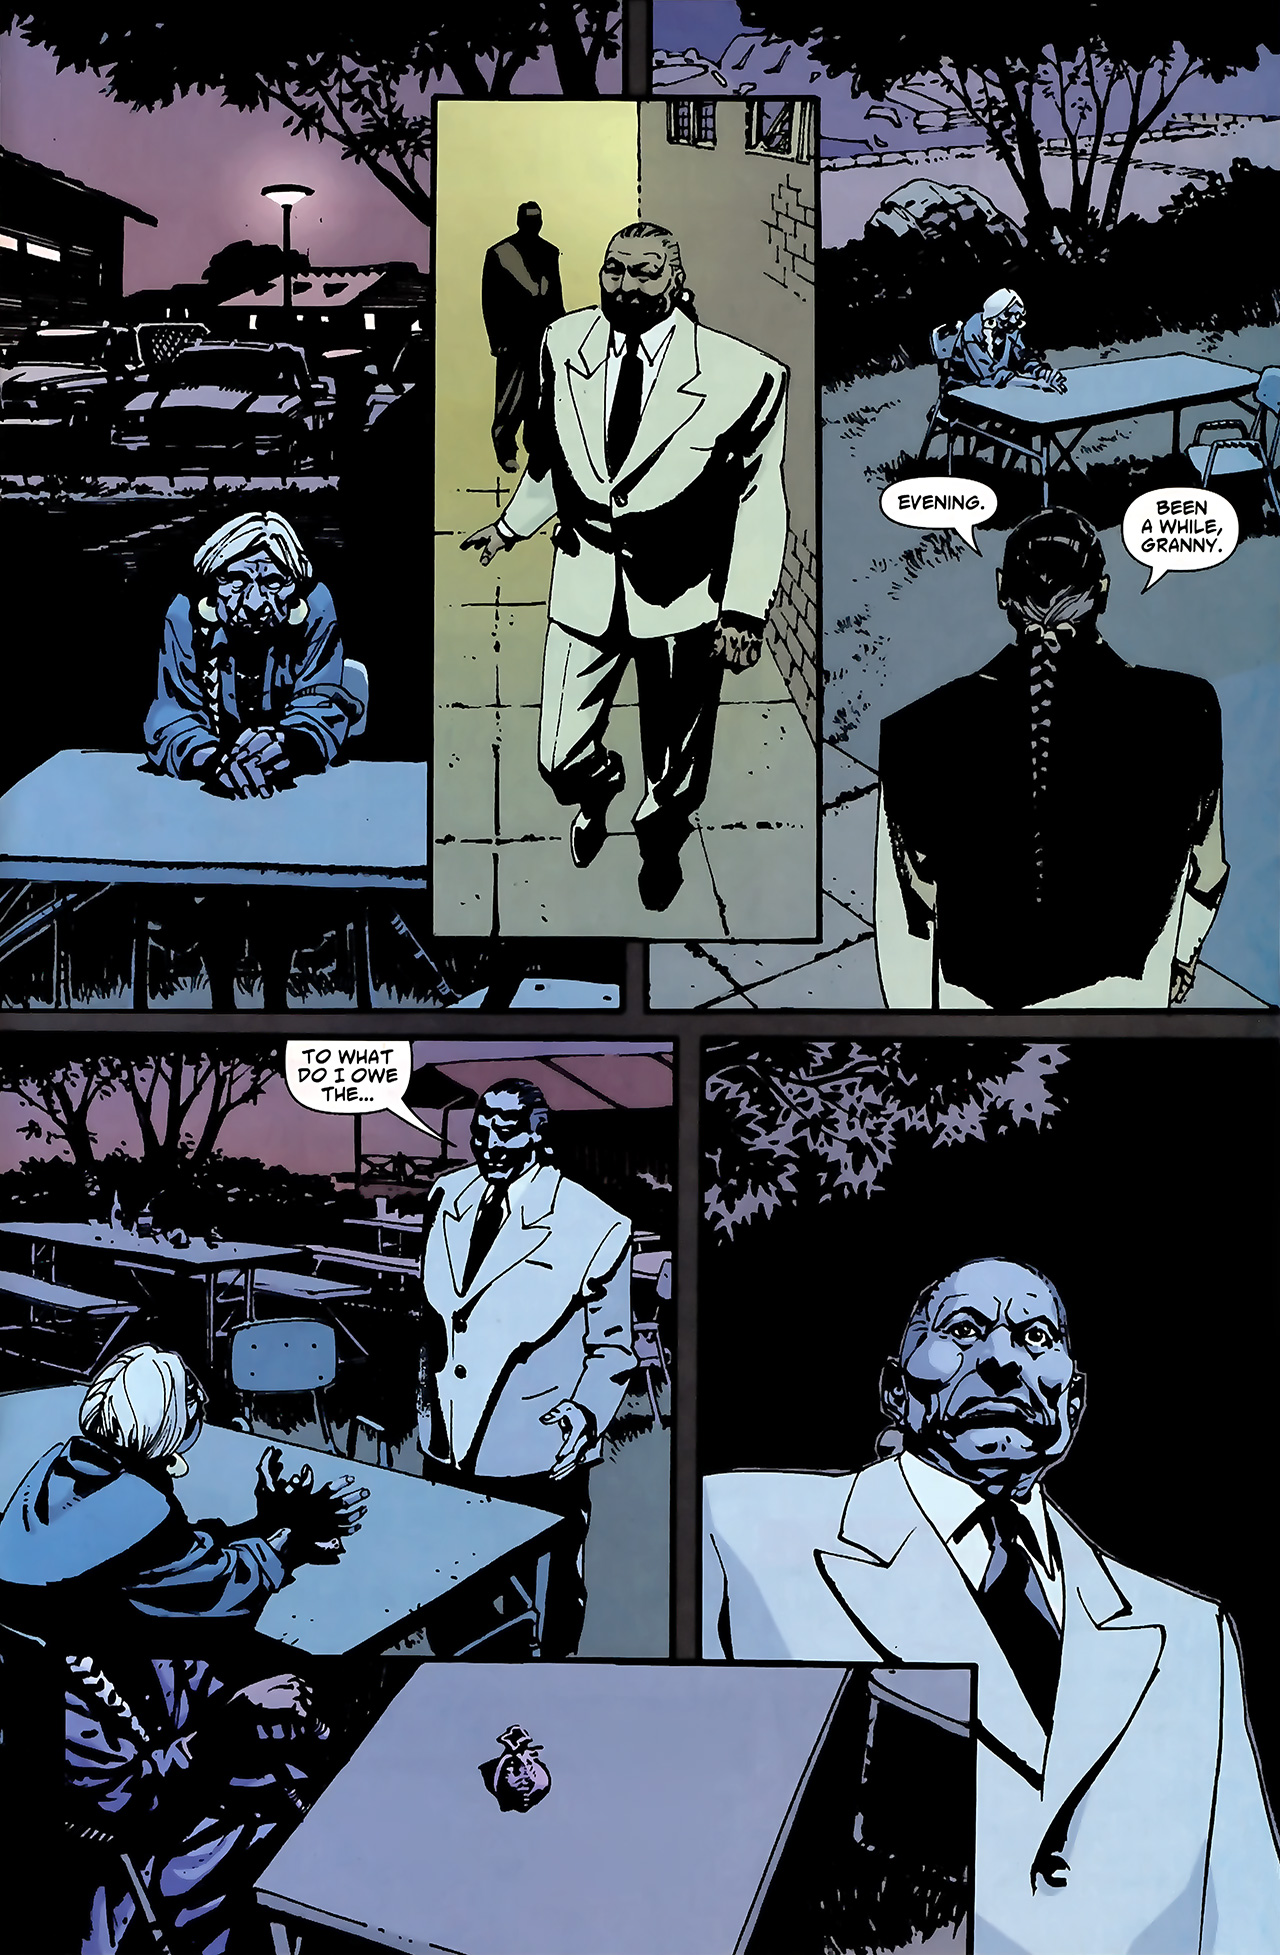 Scalped #21 - The Gravel in Your Guts, Part One 